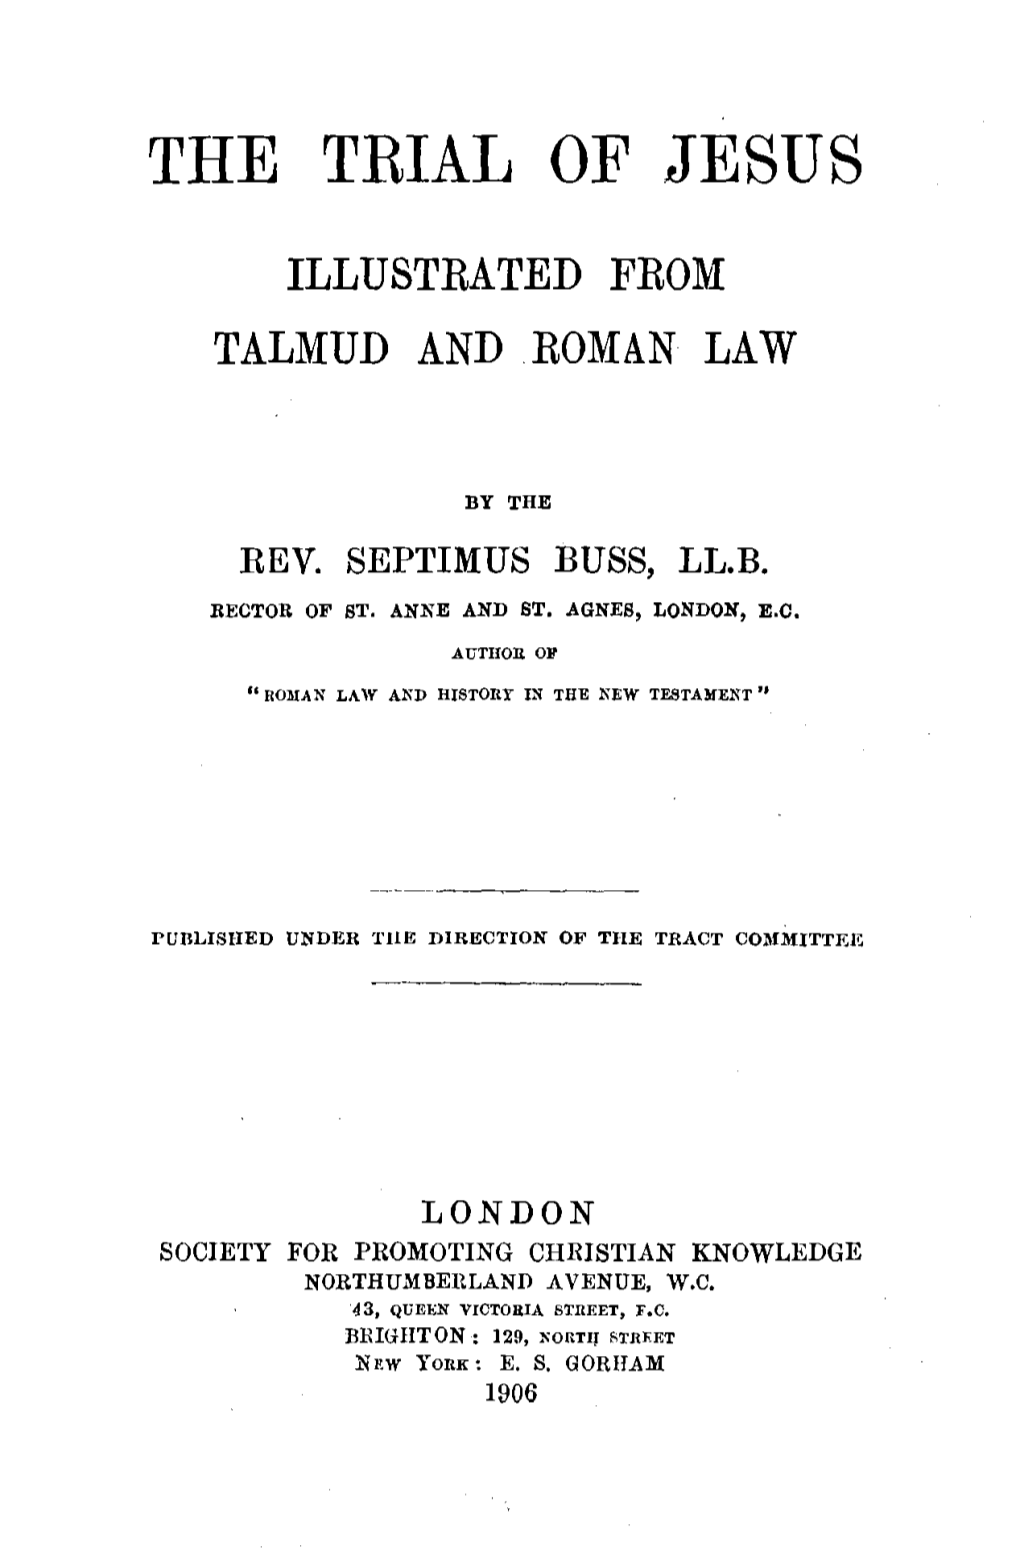 The Trial of Jesus Illustrated from Talmud and Roman Law